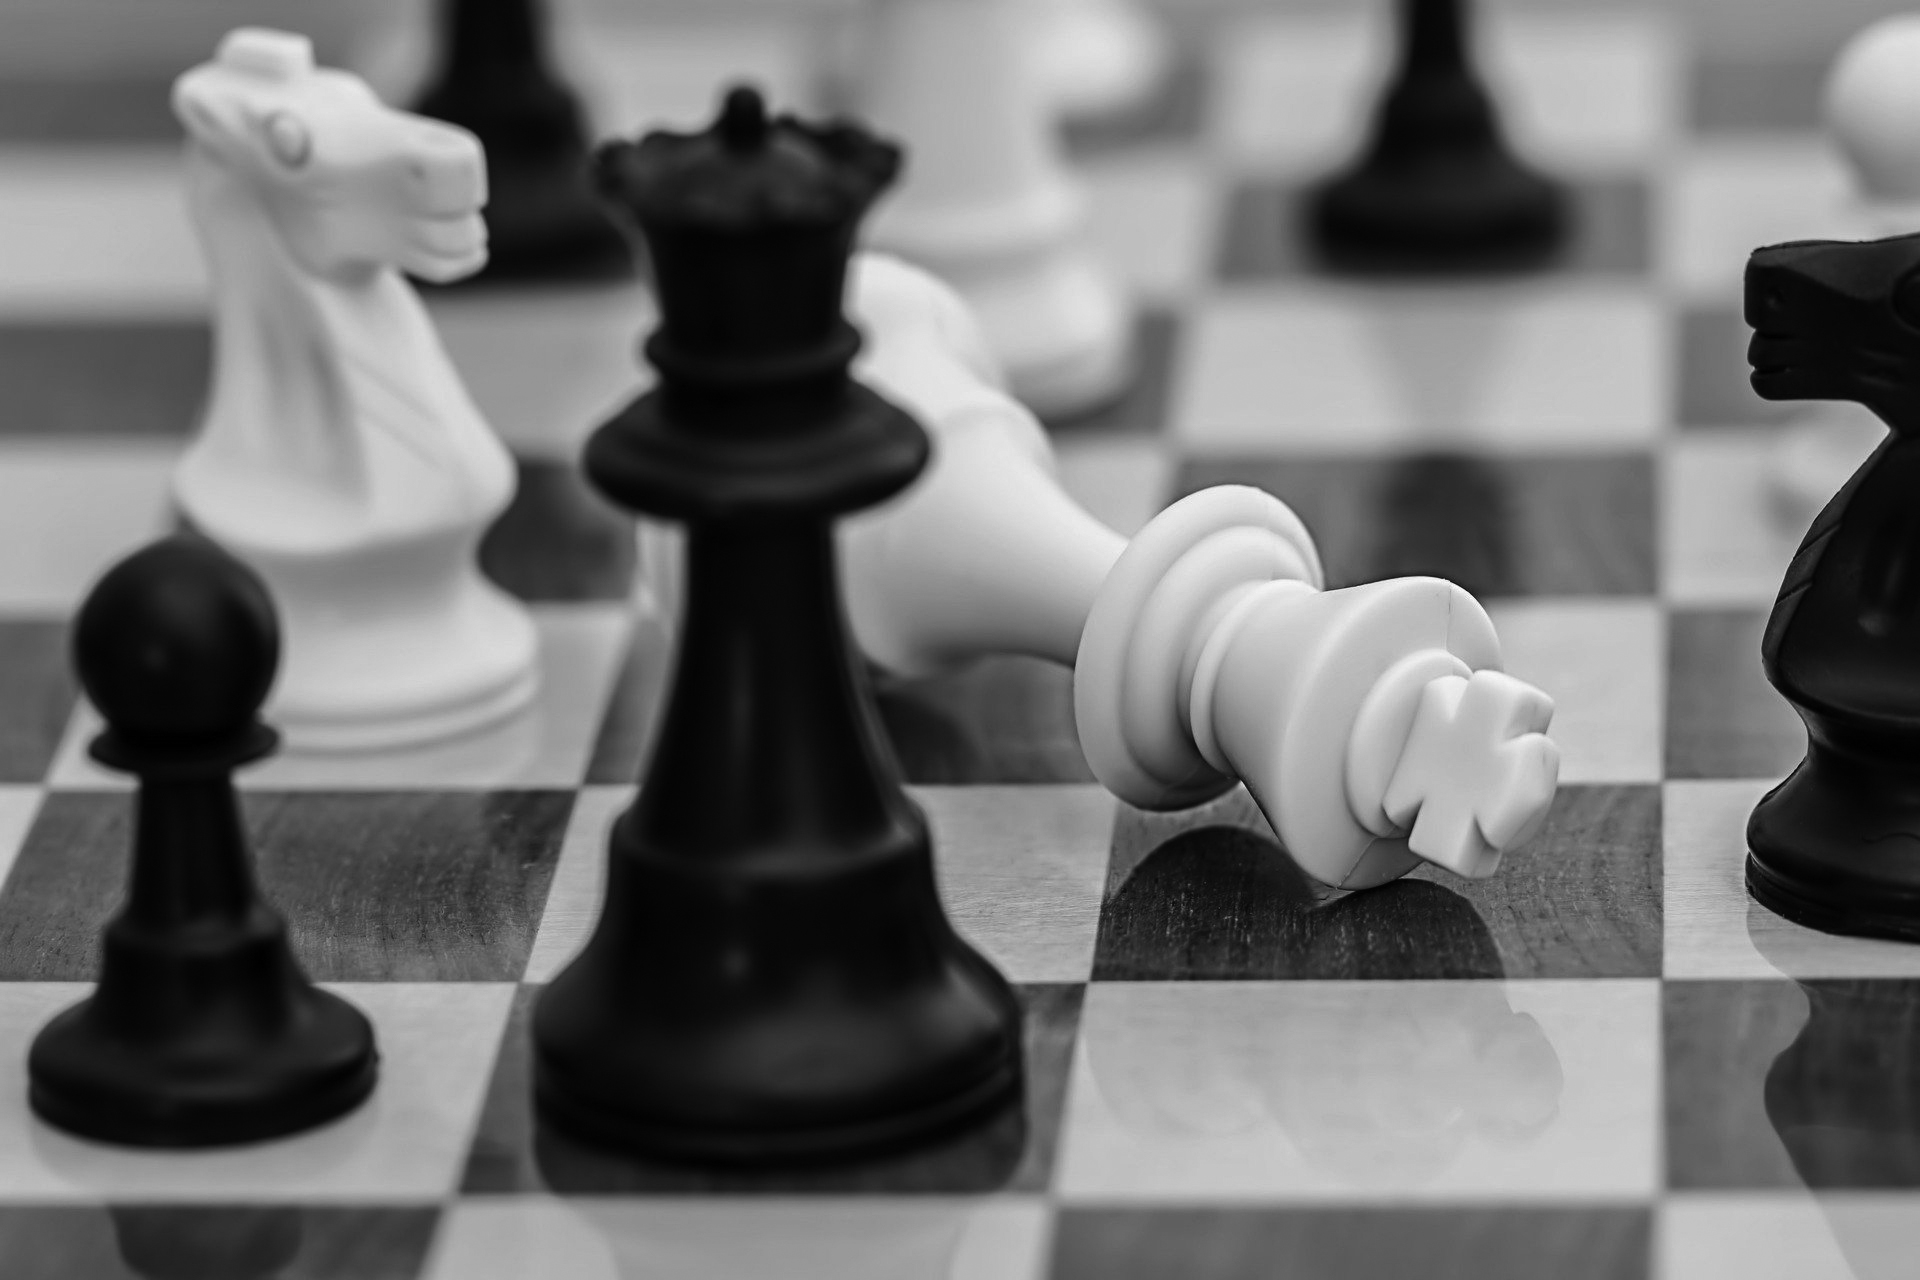 Case Study: How to spot a potential chess cheat